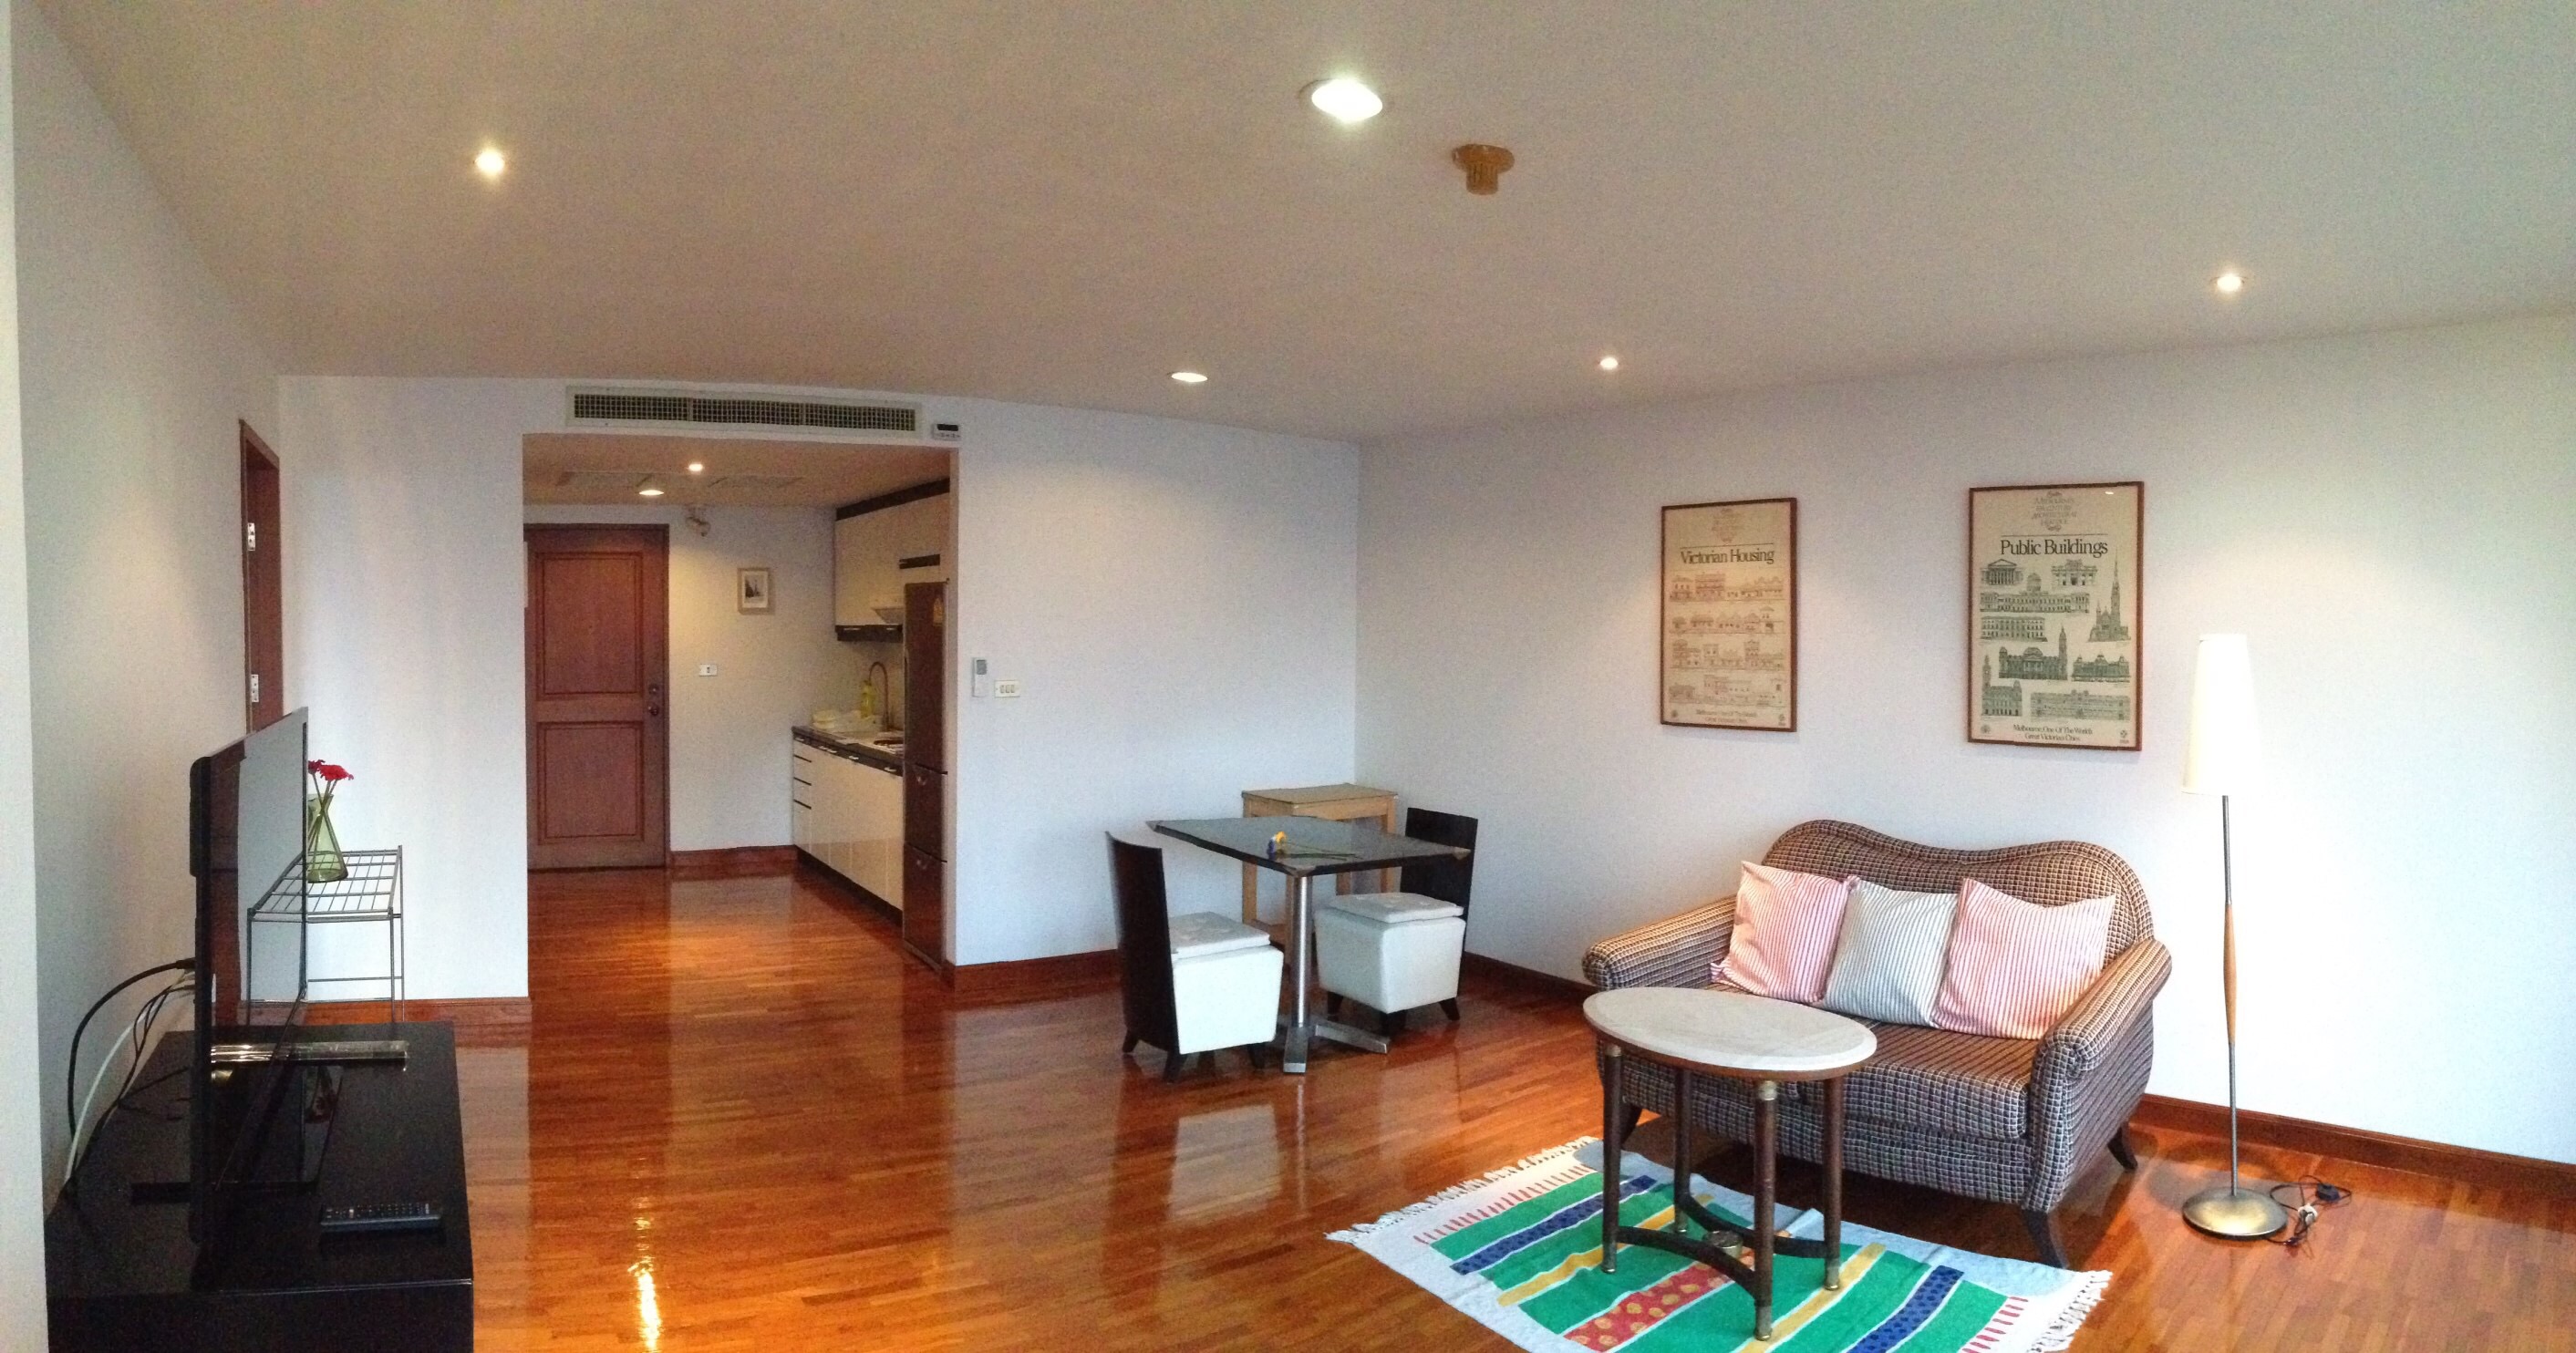 Live in Asoke <br />
near Foodland, Park<br />
with space <br />